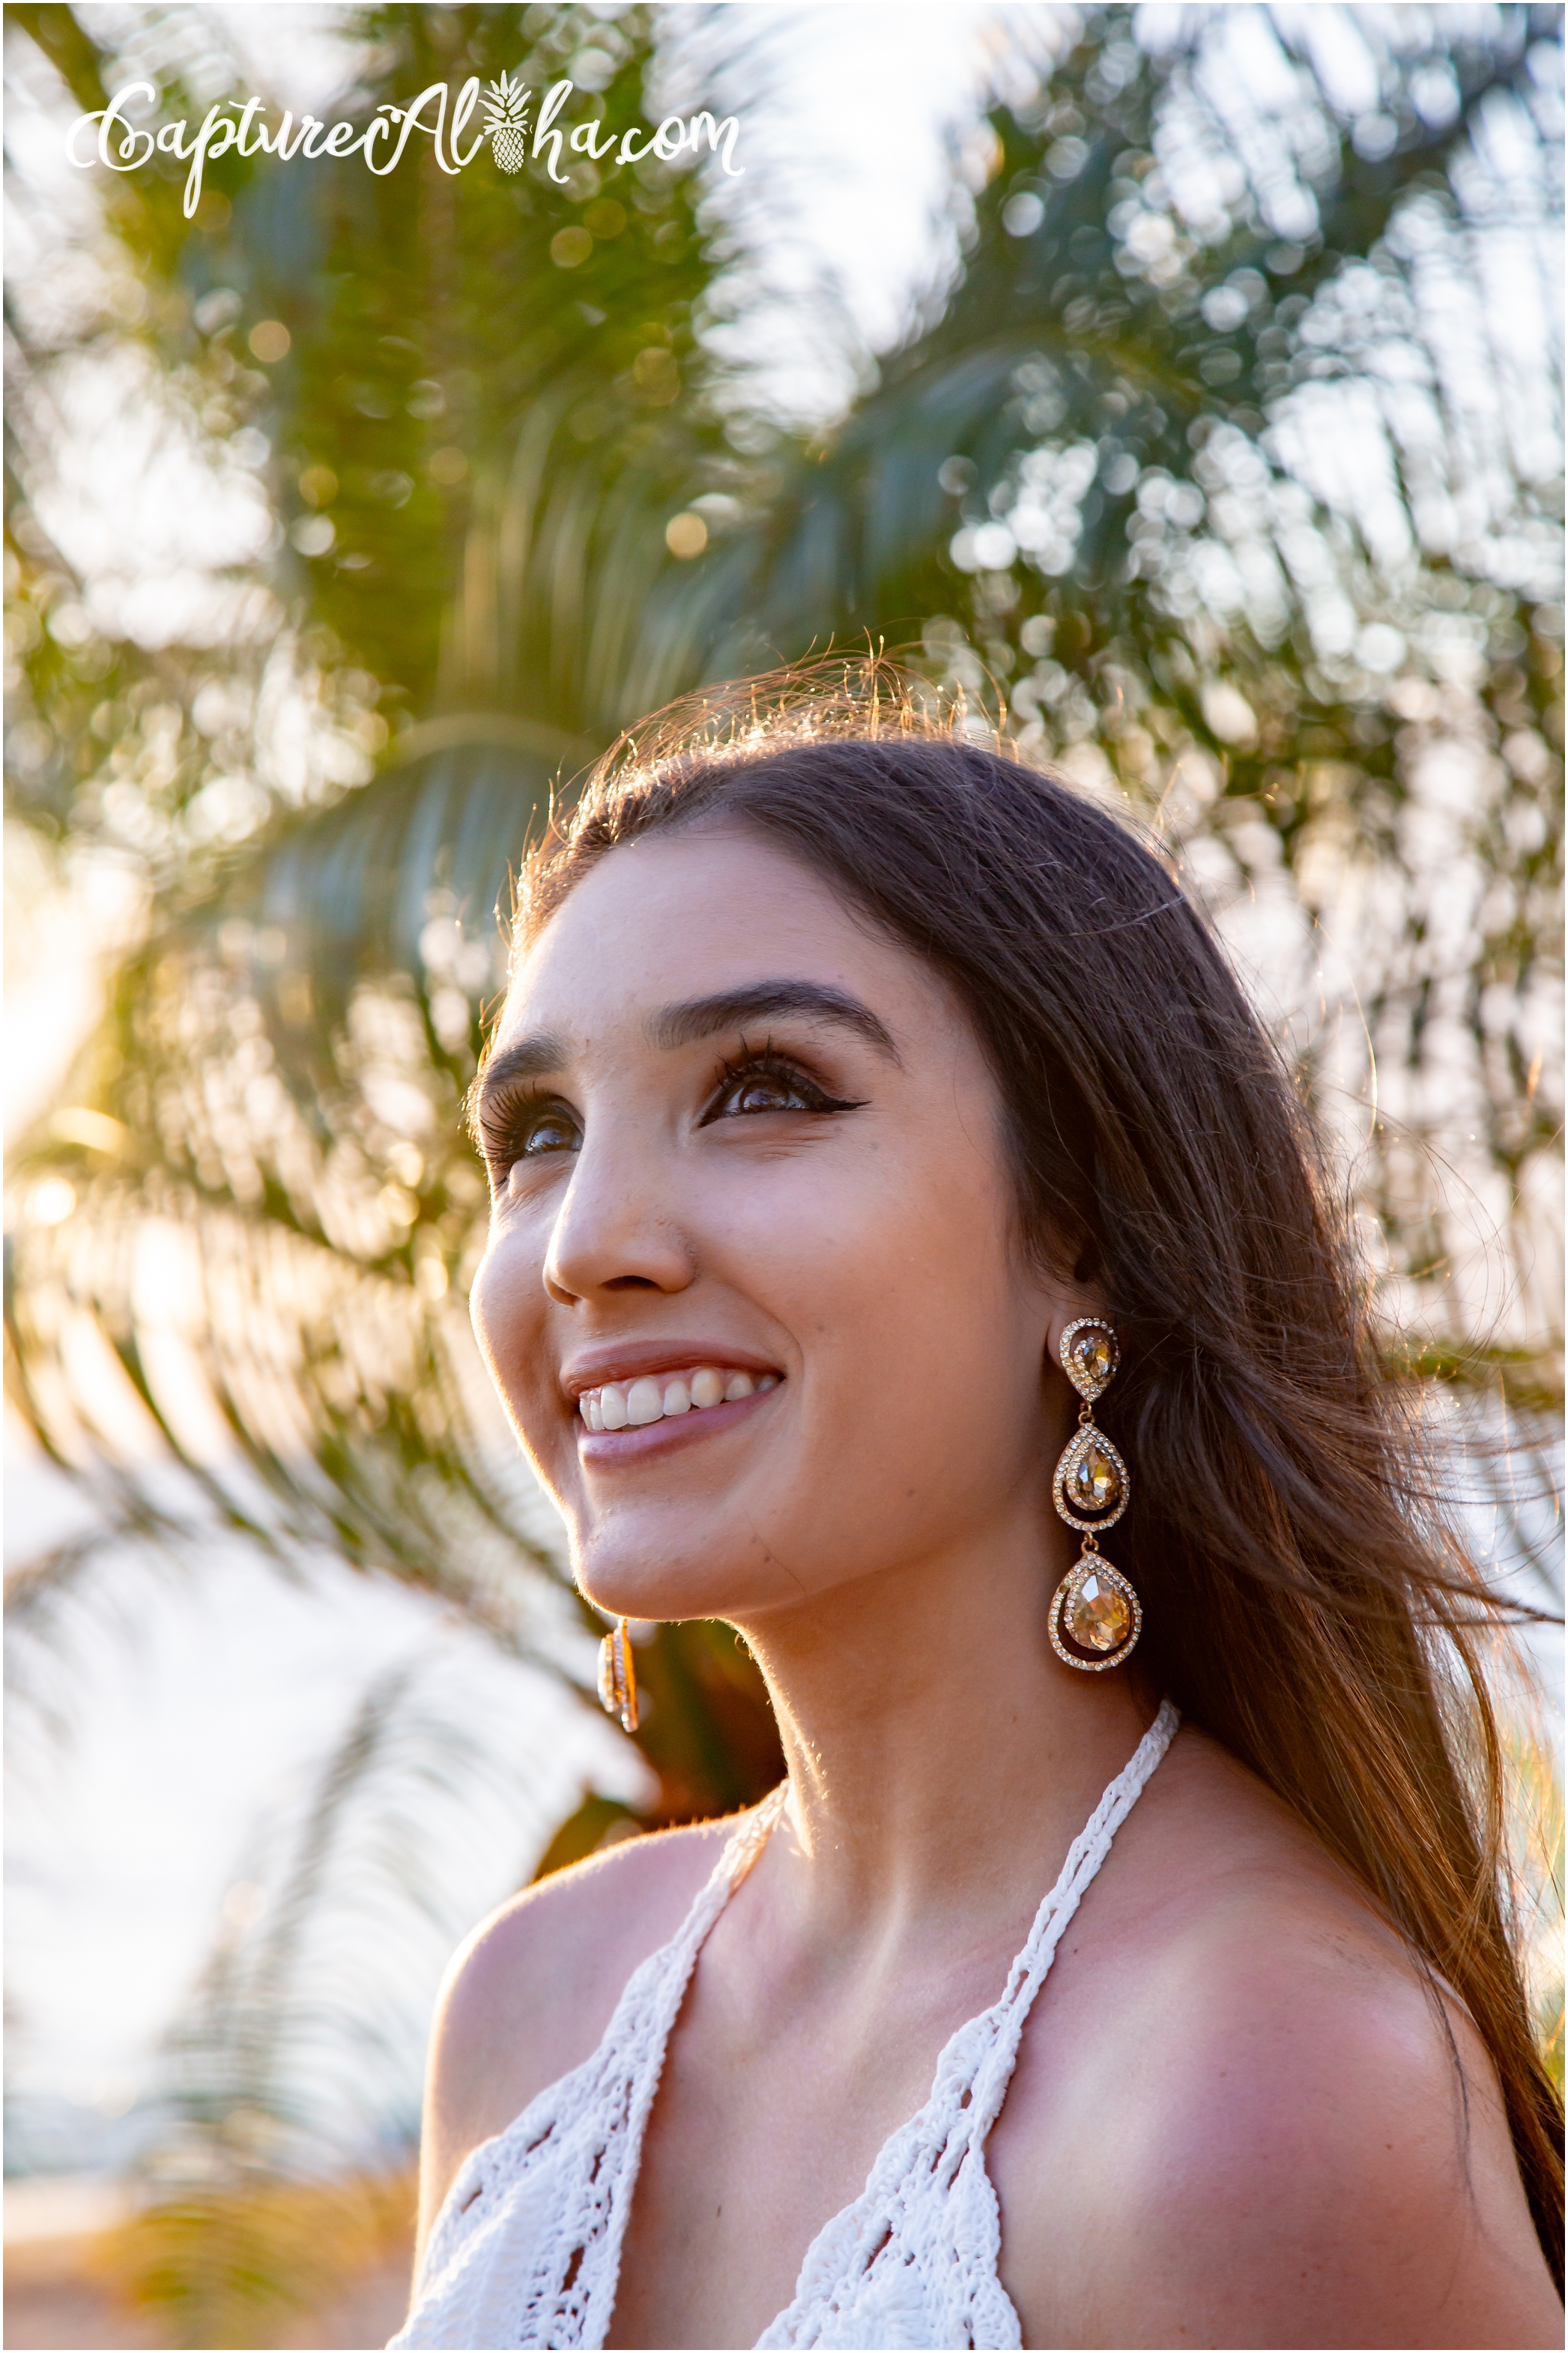 Maui Senior Portrait Photography at Sunset in Kaanapali